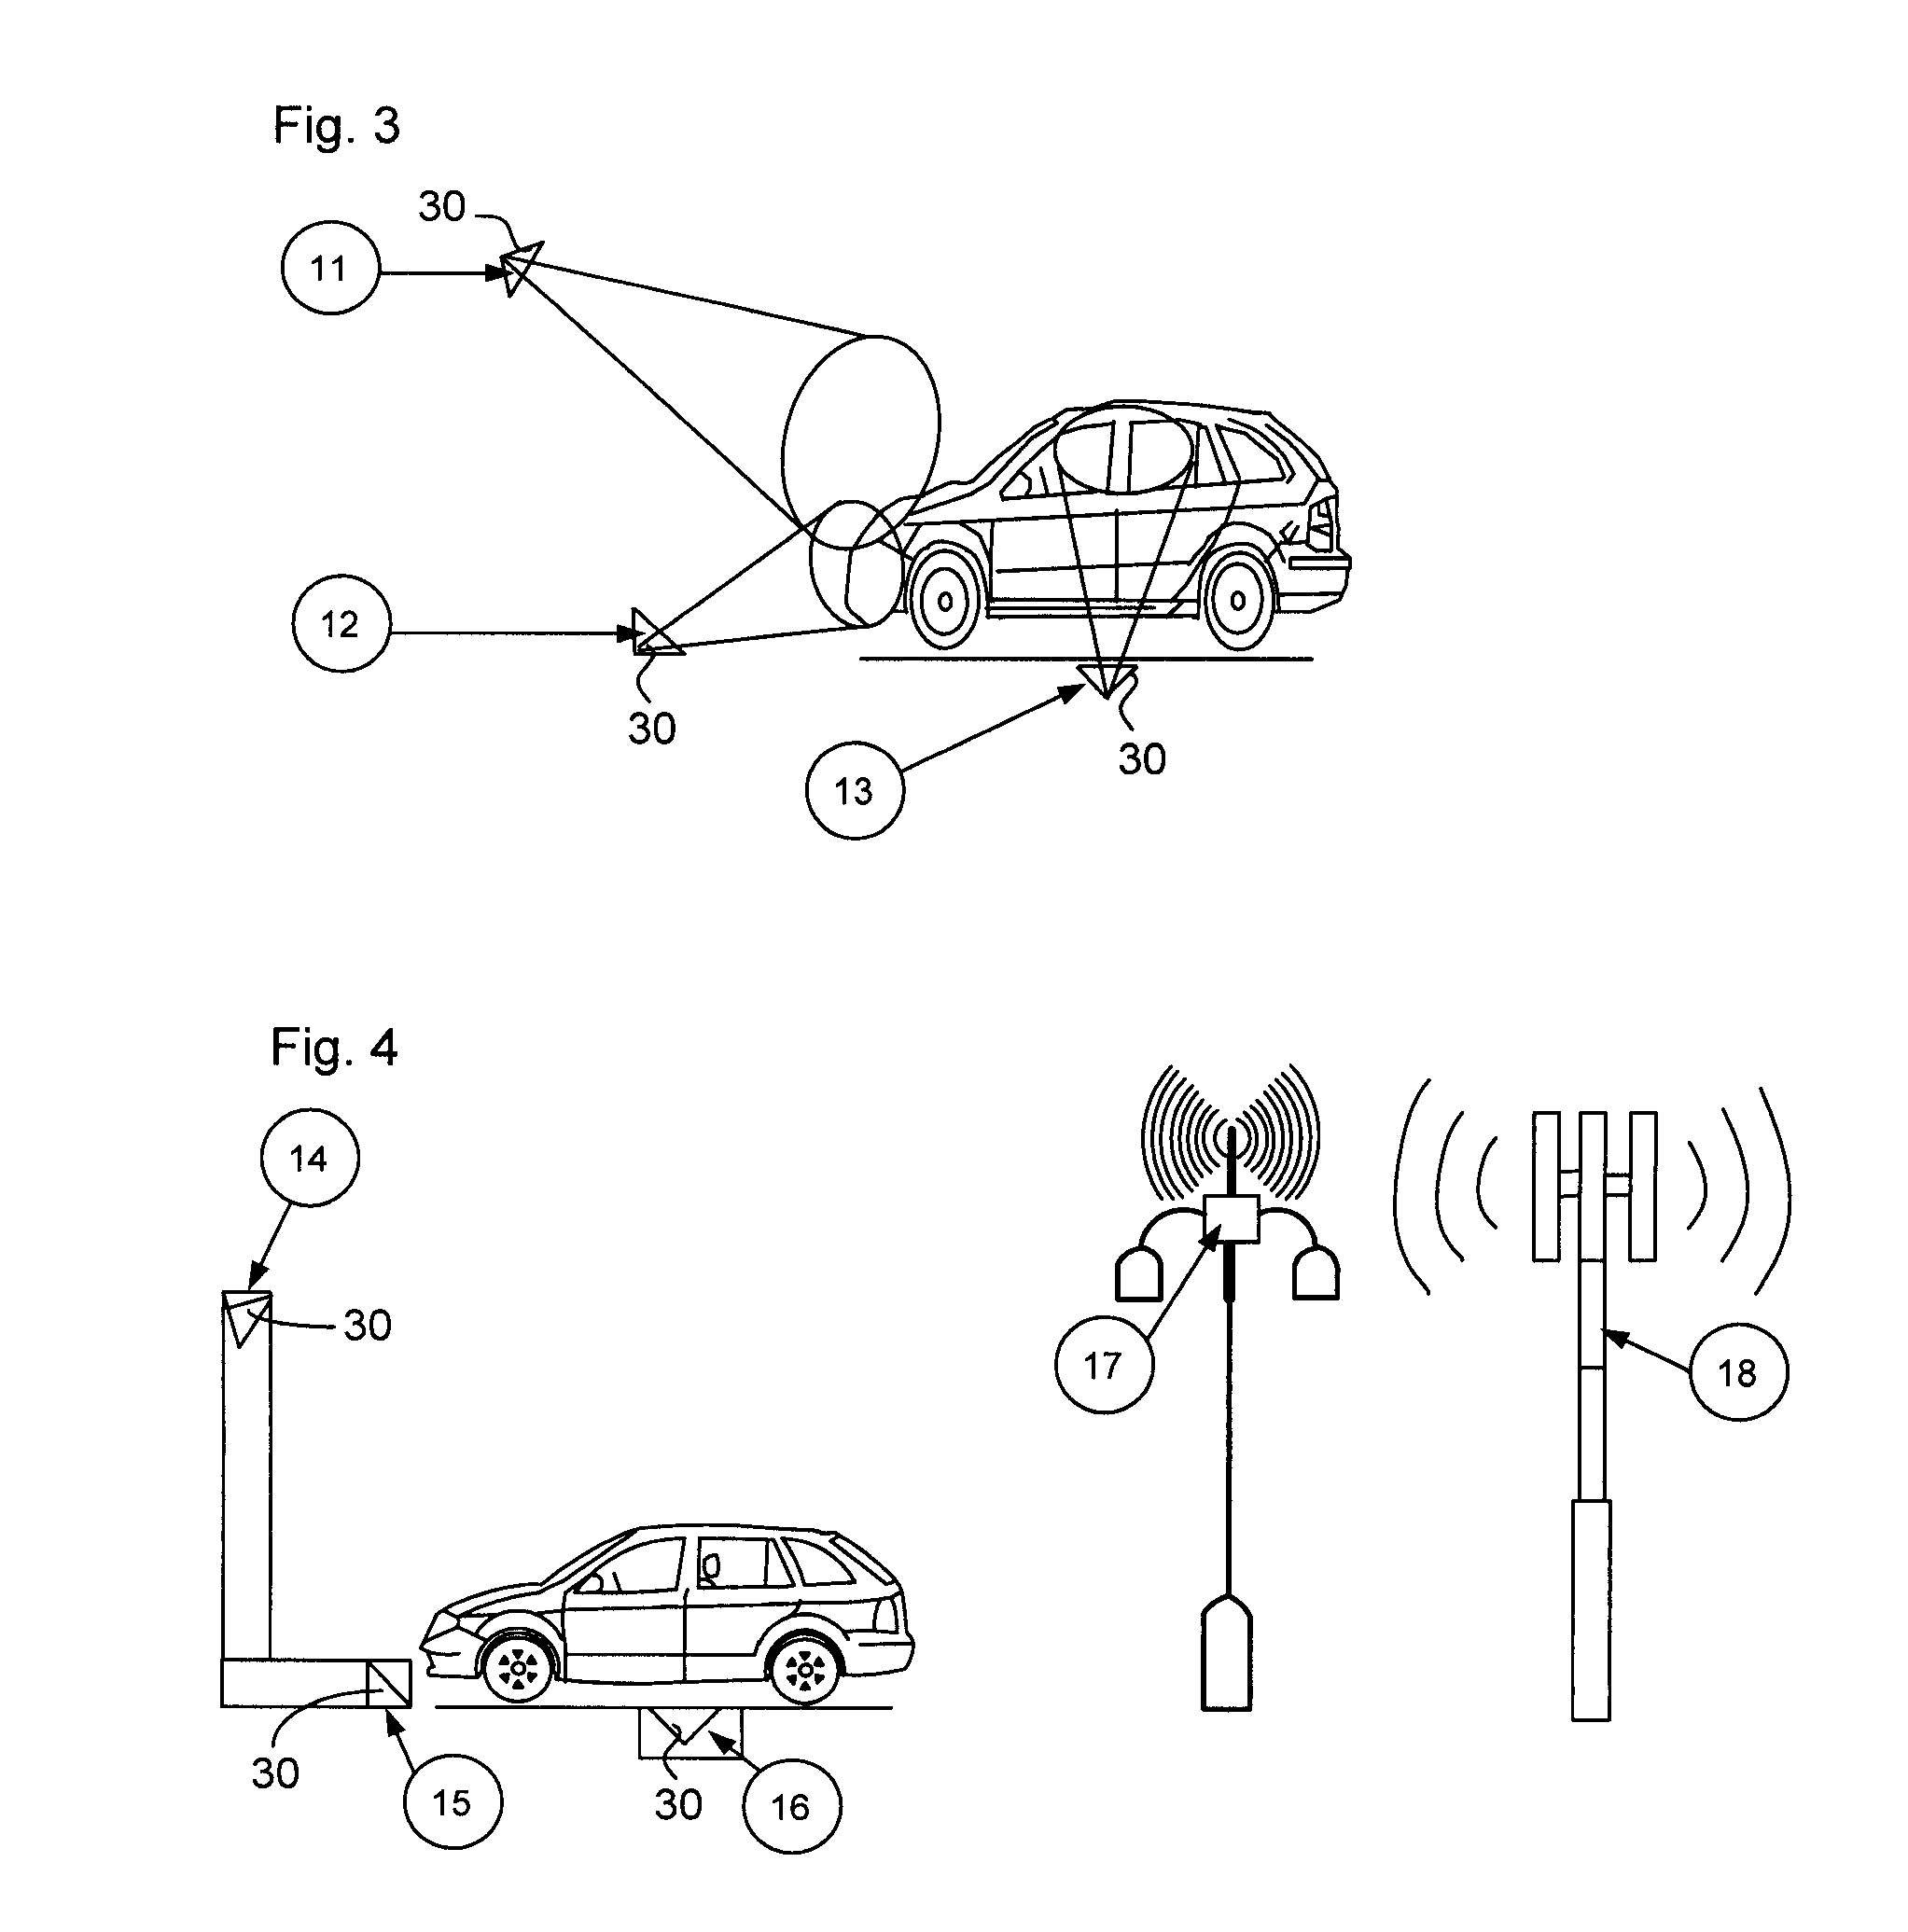 Directional speed and distance sensor